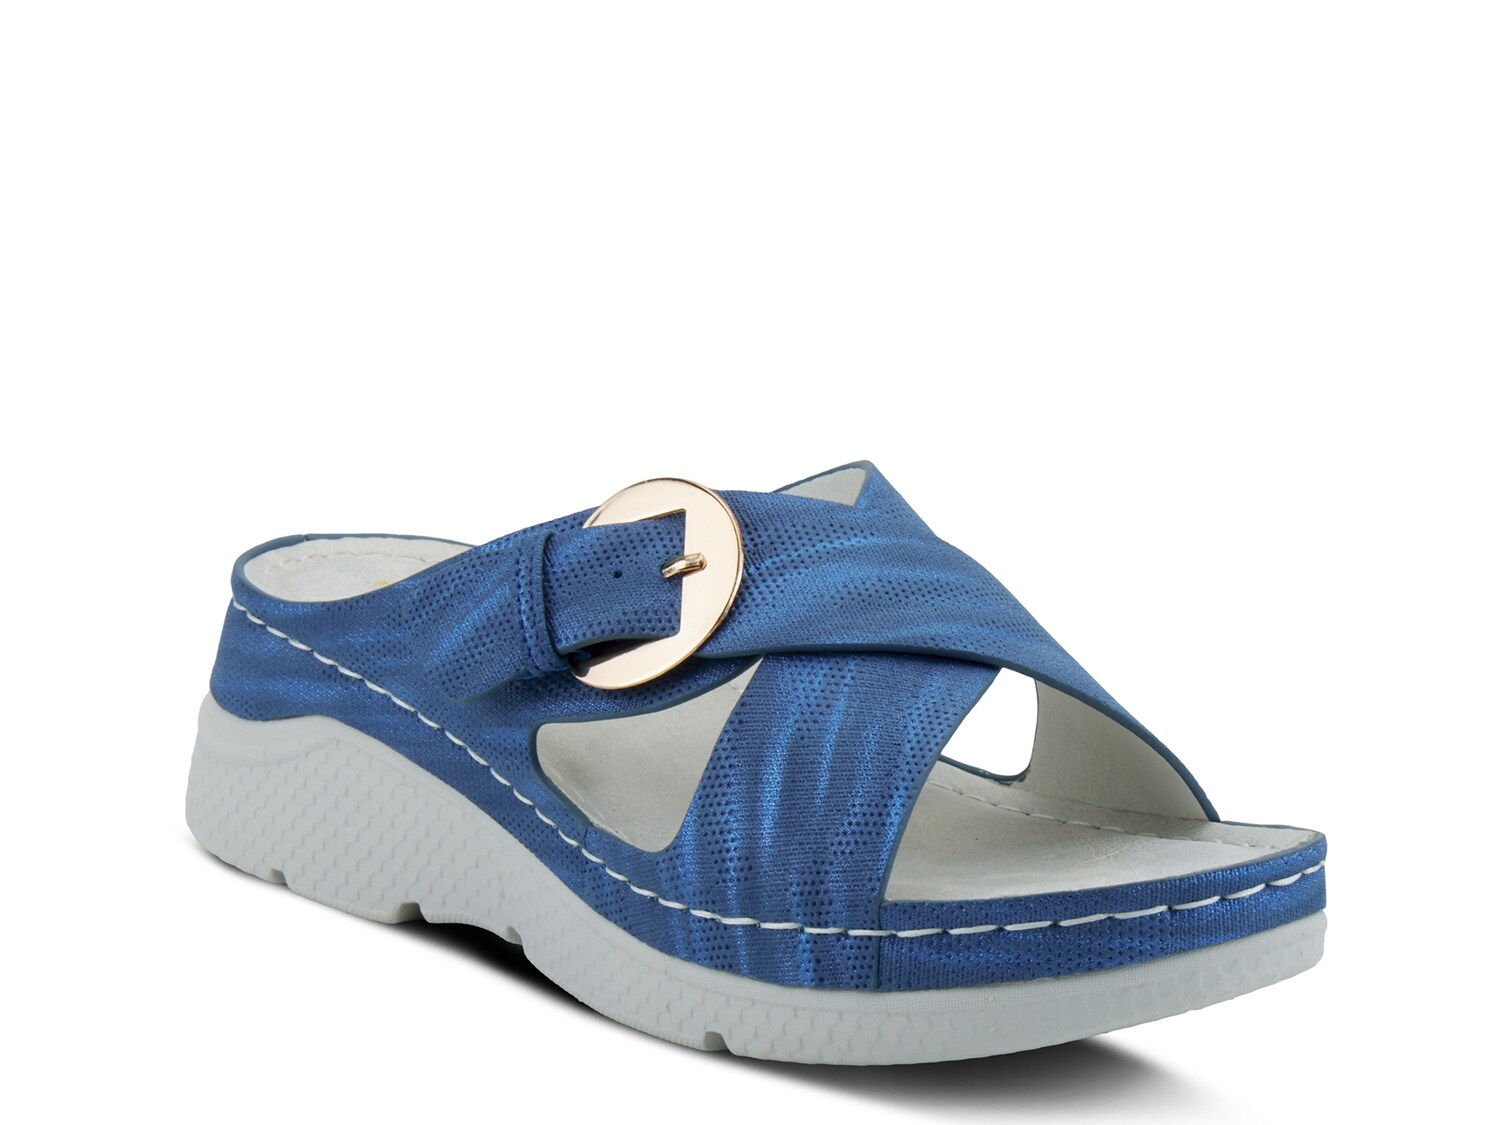 Flexus by Spring Step Persemia Sandal - Free Shipping | DSW